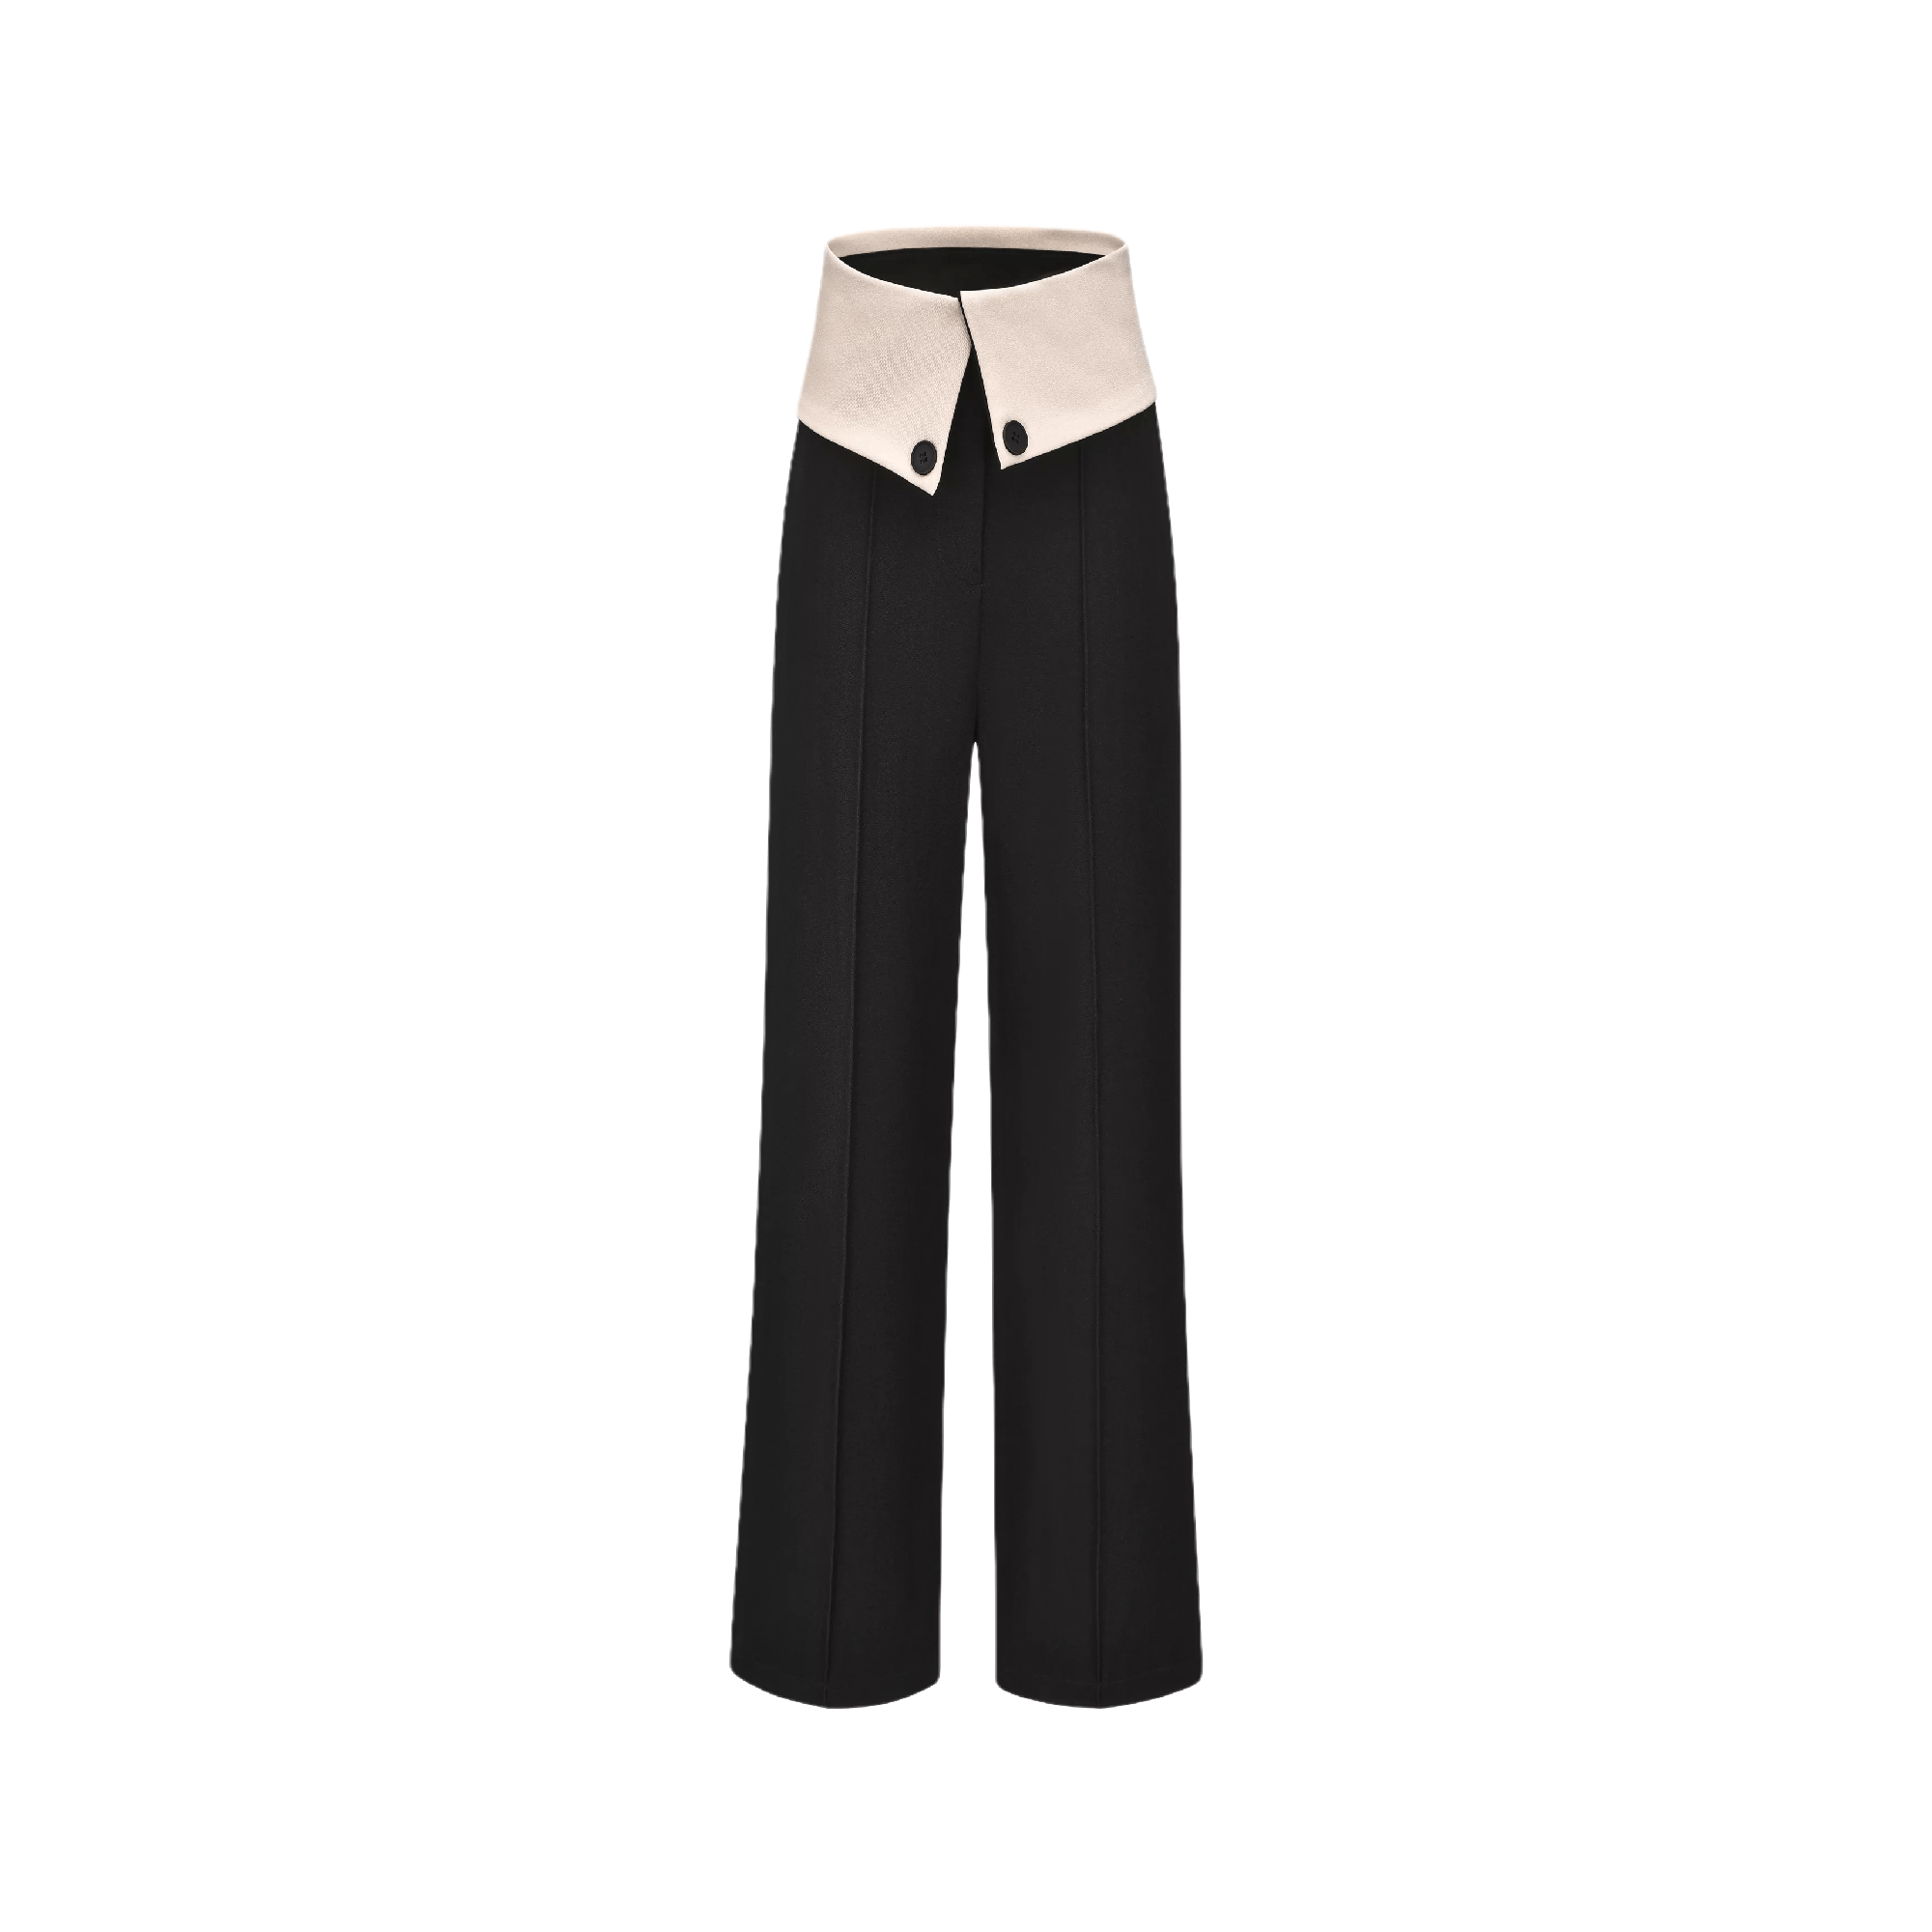 Savage-inside-out contrast-color trousers - itsy, it‘s different